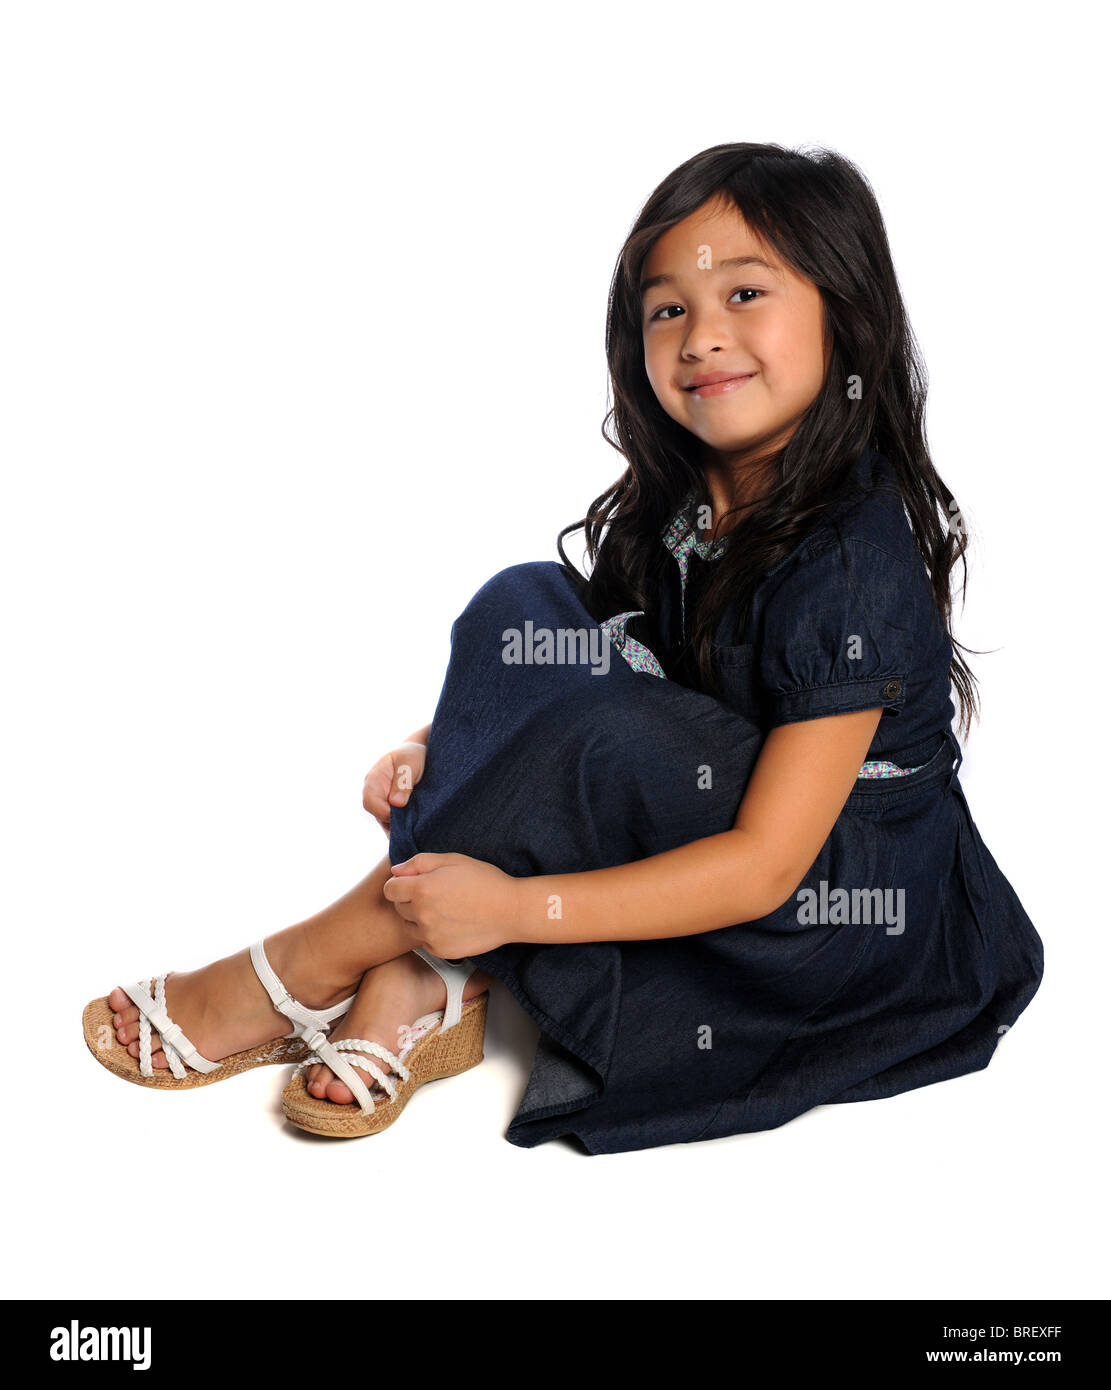 Portrait of young Asian girl sitting isolated over white background Stock Photo